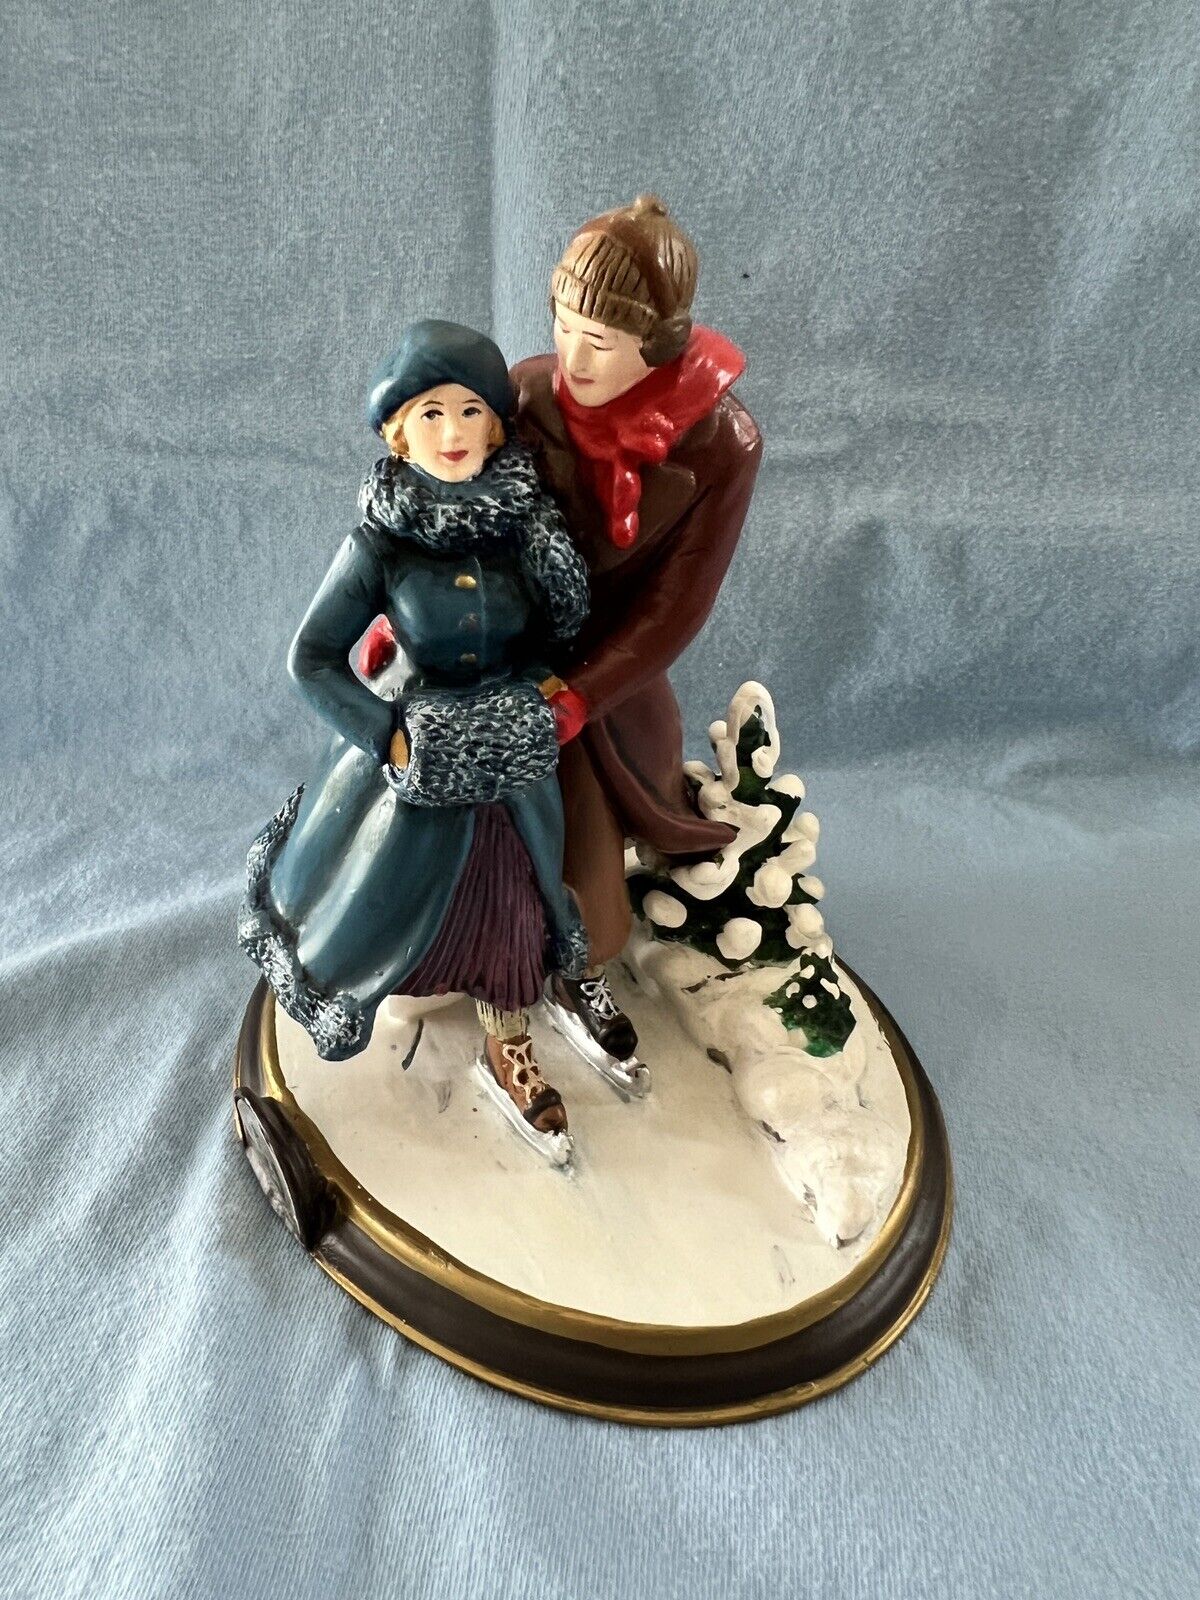 Norman Rockwell “The Skaters Waltz” 1995 Anniversary Edition Figurine 